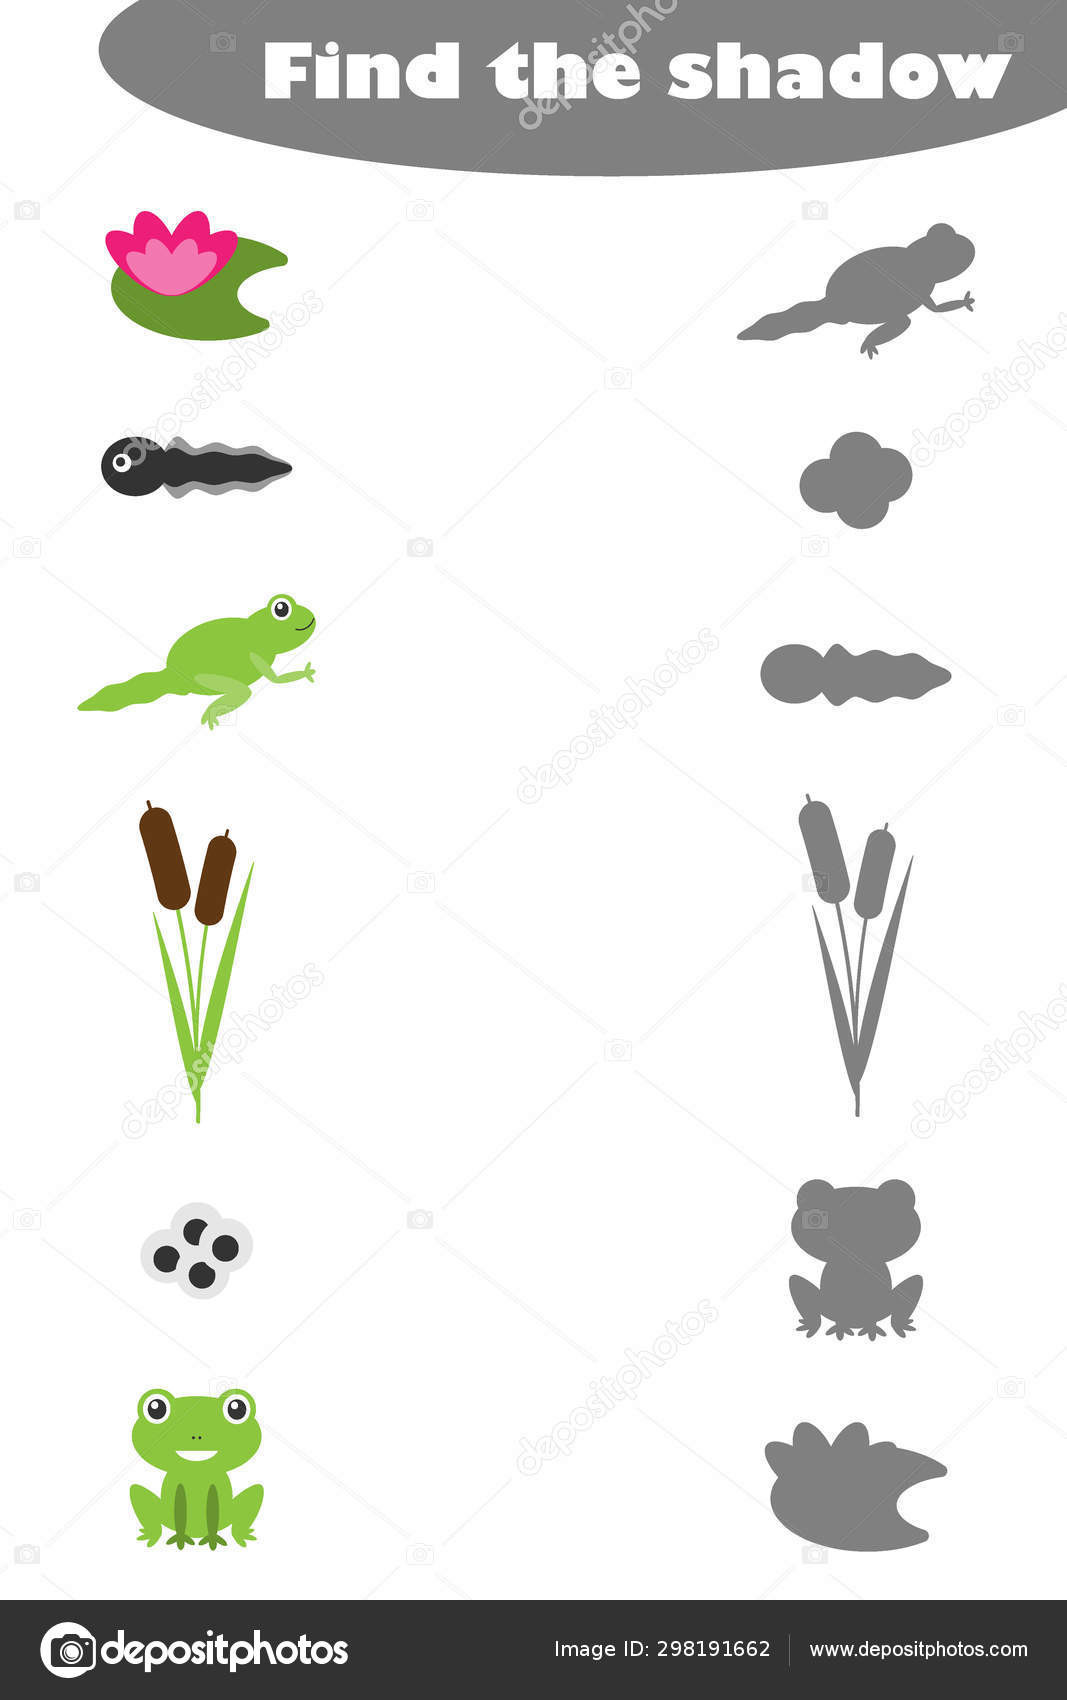 Frog Life Cycle Worksheet Find the Shadow Game for Children Frog Life Cycle and Pond In Cartoon Style Education Game for Kids Preschool Worksheet Activity Task for the